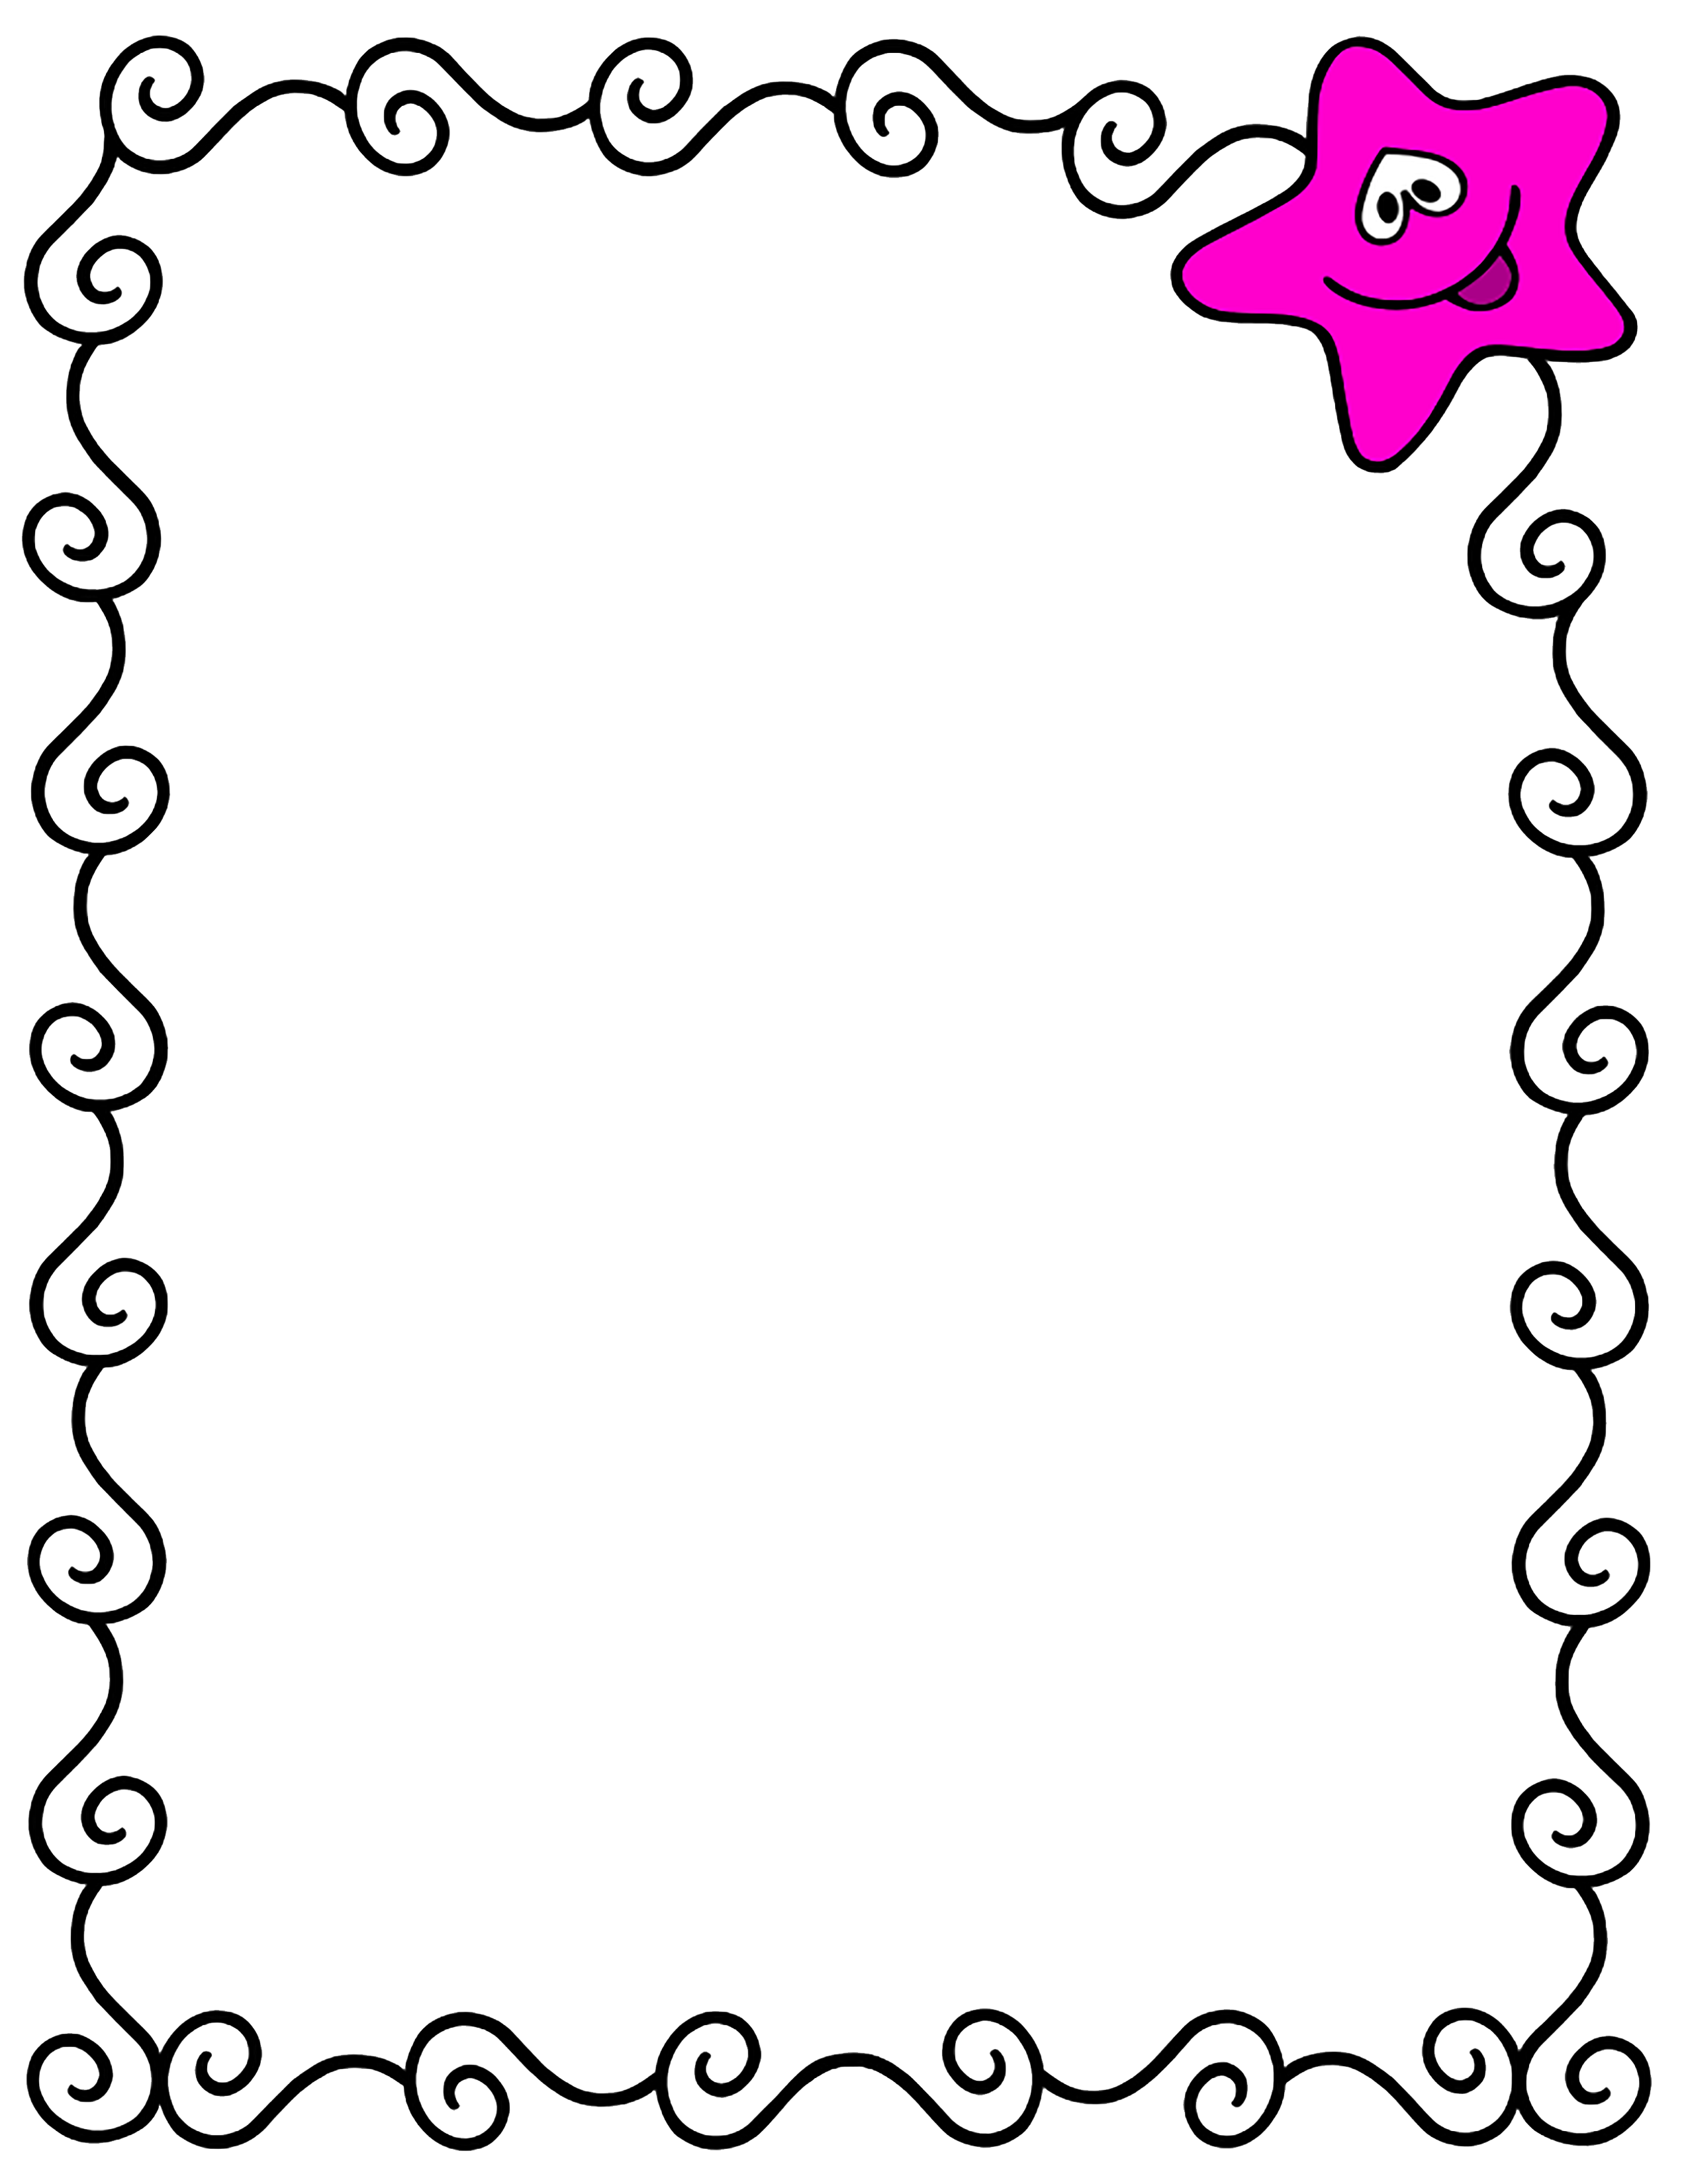  stationery no lines. Moon clipart frame